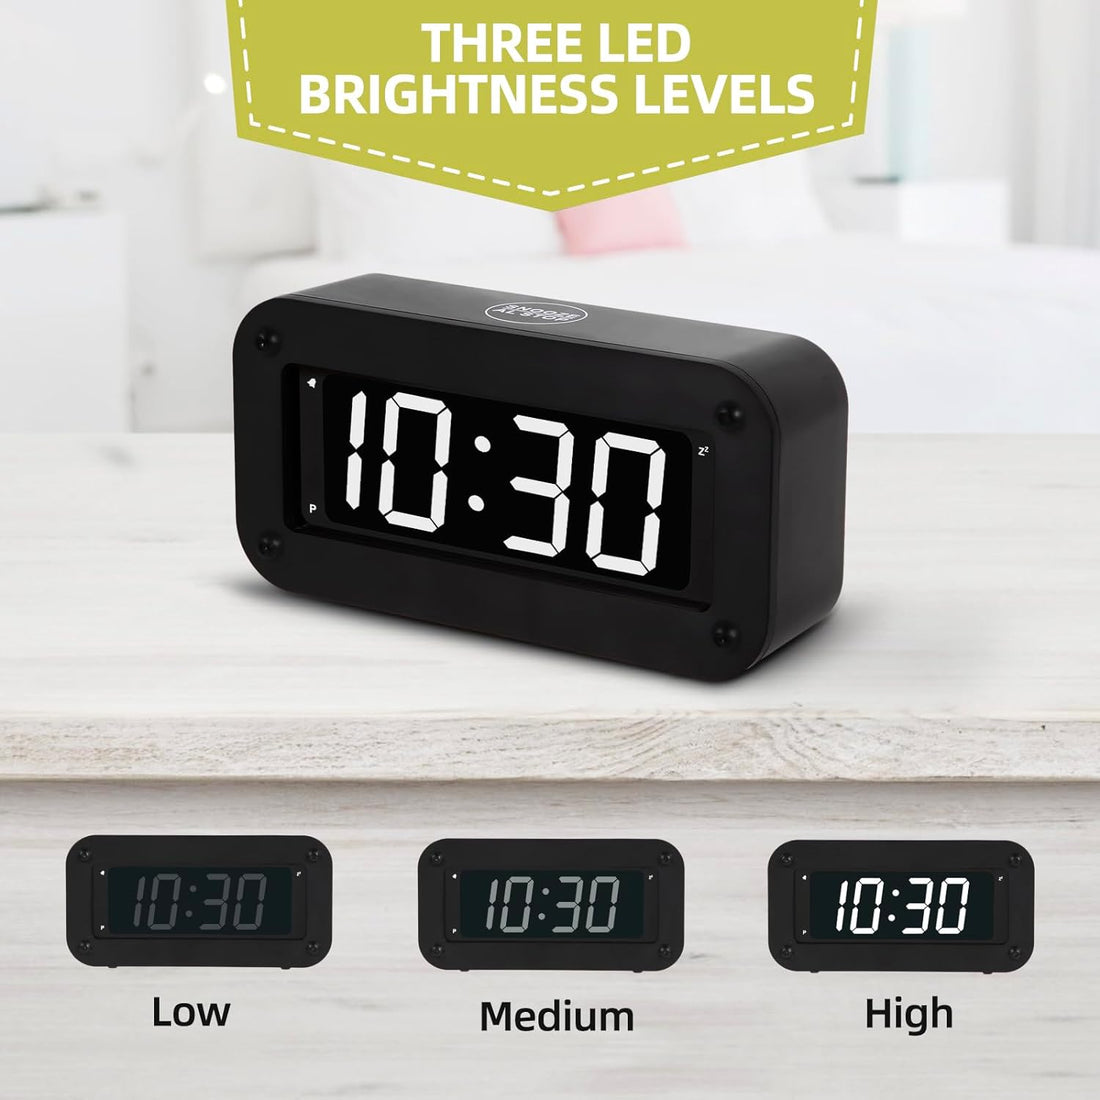 Timegyro Digital Alarm Clock Battery Operated with LED Display, Long Battery Life for 12 Months, Black Case with White Digits